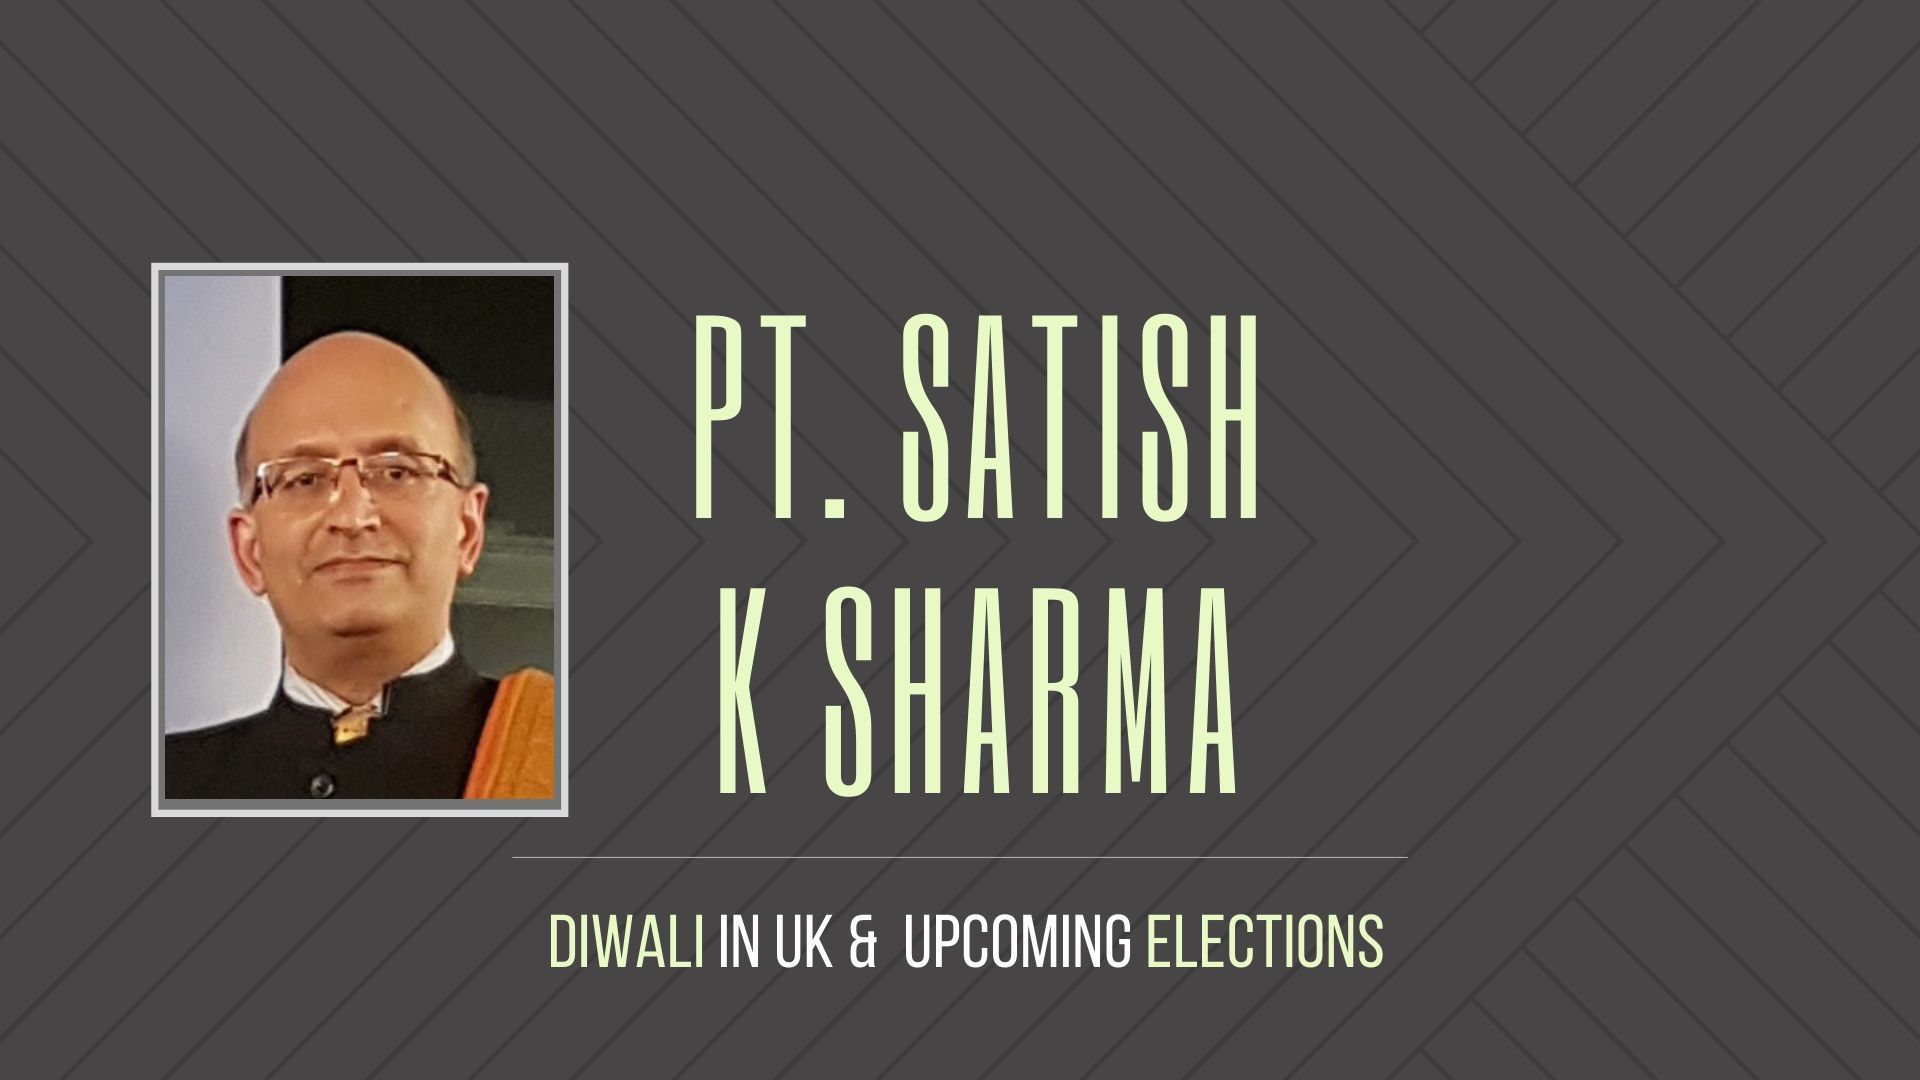 Satish Sharma thinks that with Keith Vaz being suspended for six months and Labour Party's hypocrisy becoming more and more apparent, the December 12 elections may make the UK Labour Party go the way of the Indian National Congress.